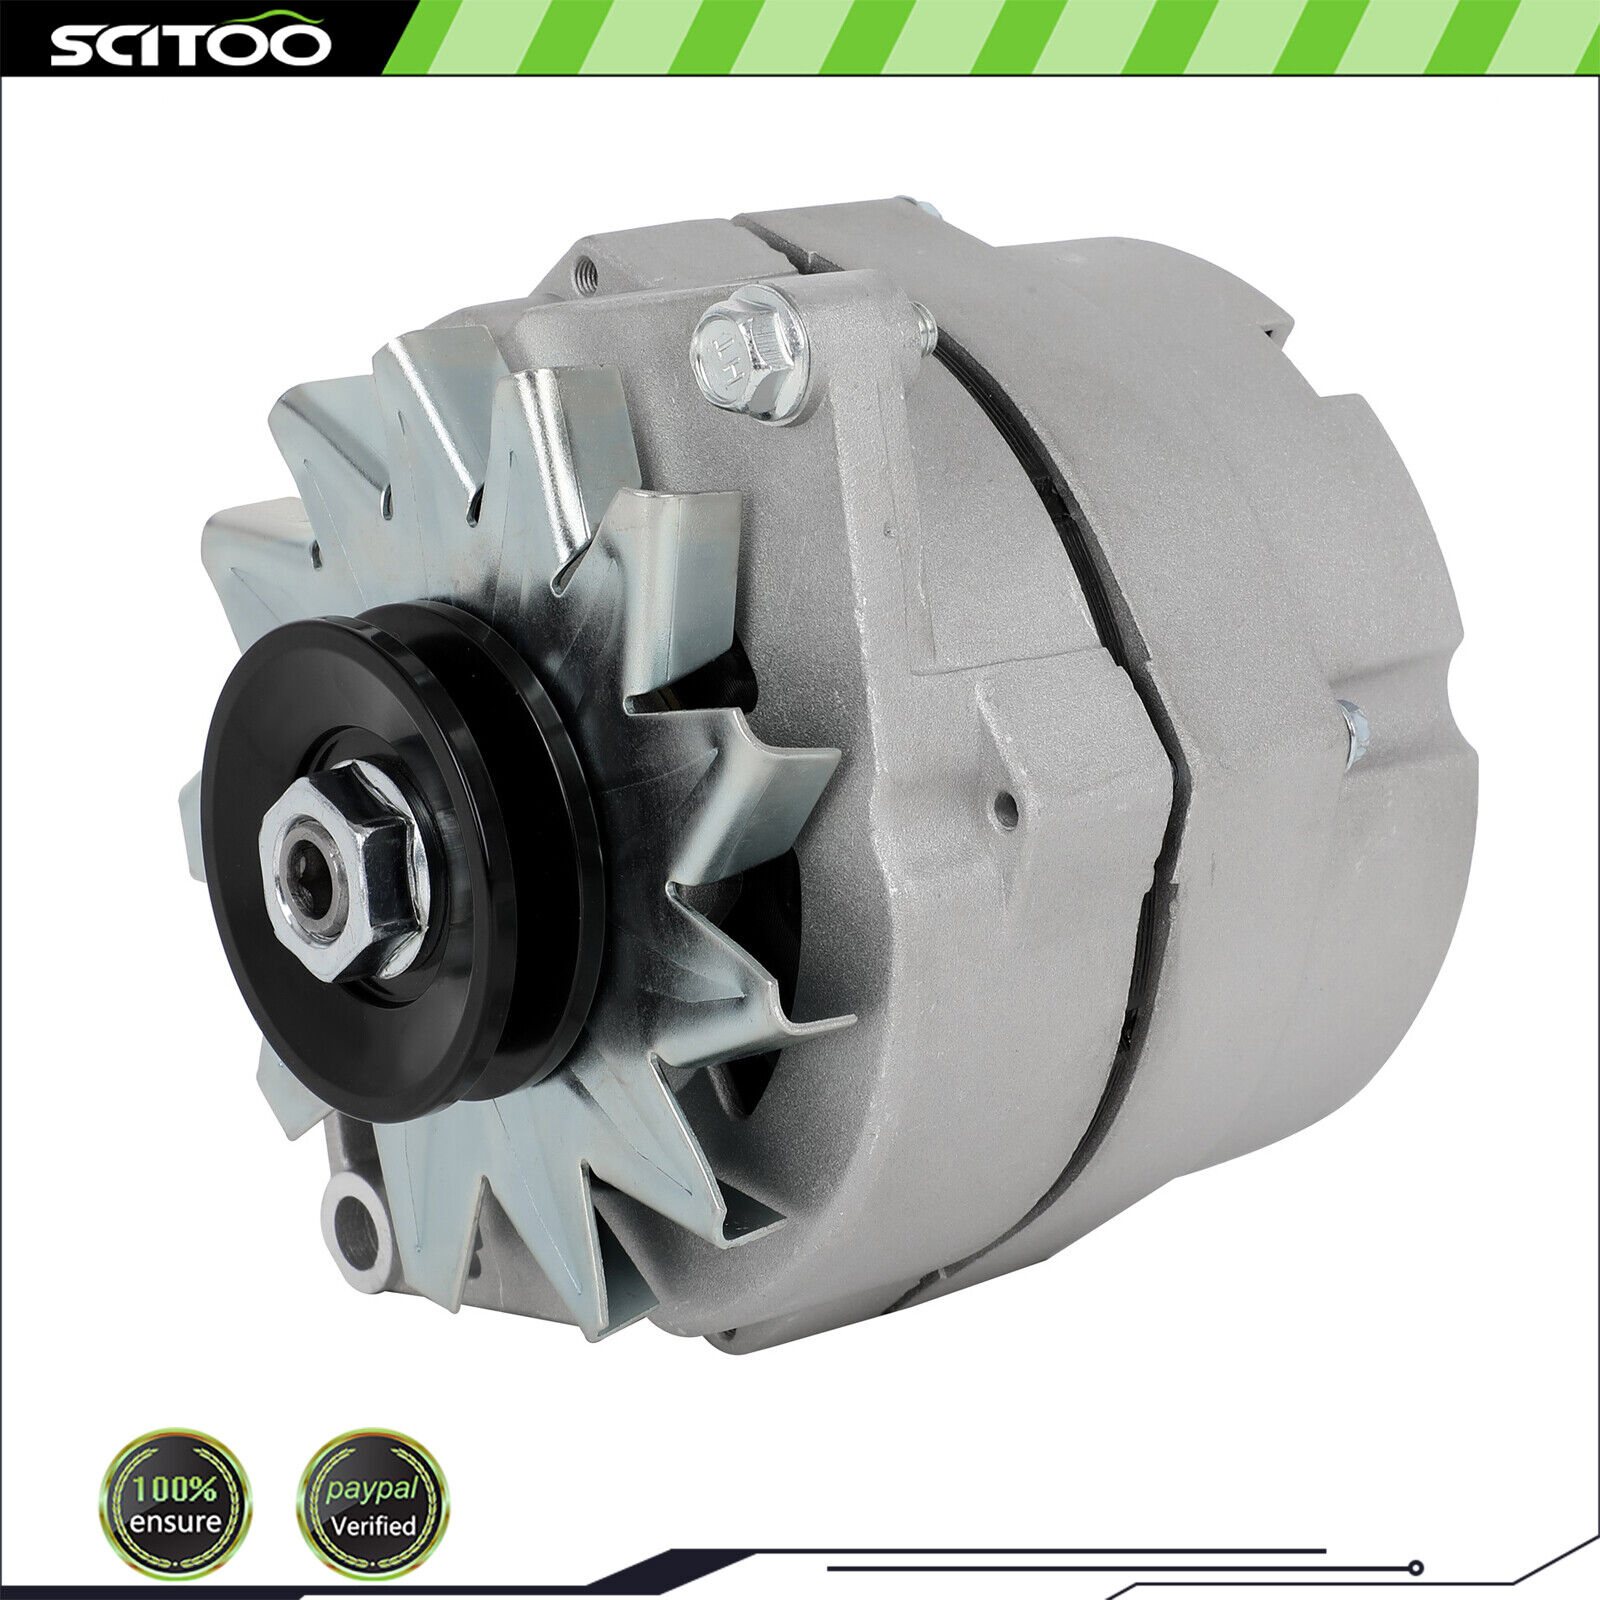 Alternator High Output For Chevy one 1 Wire 105 Amp DELCO 10SI Self-Exciting 12V